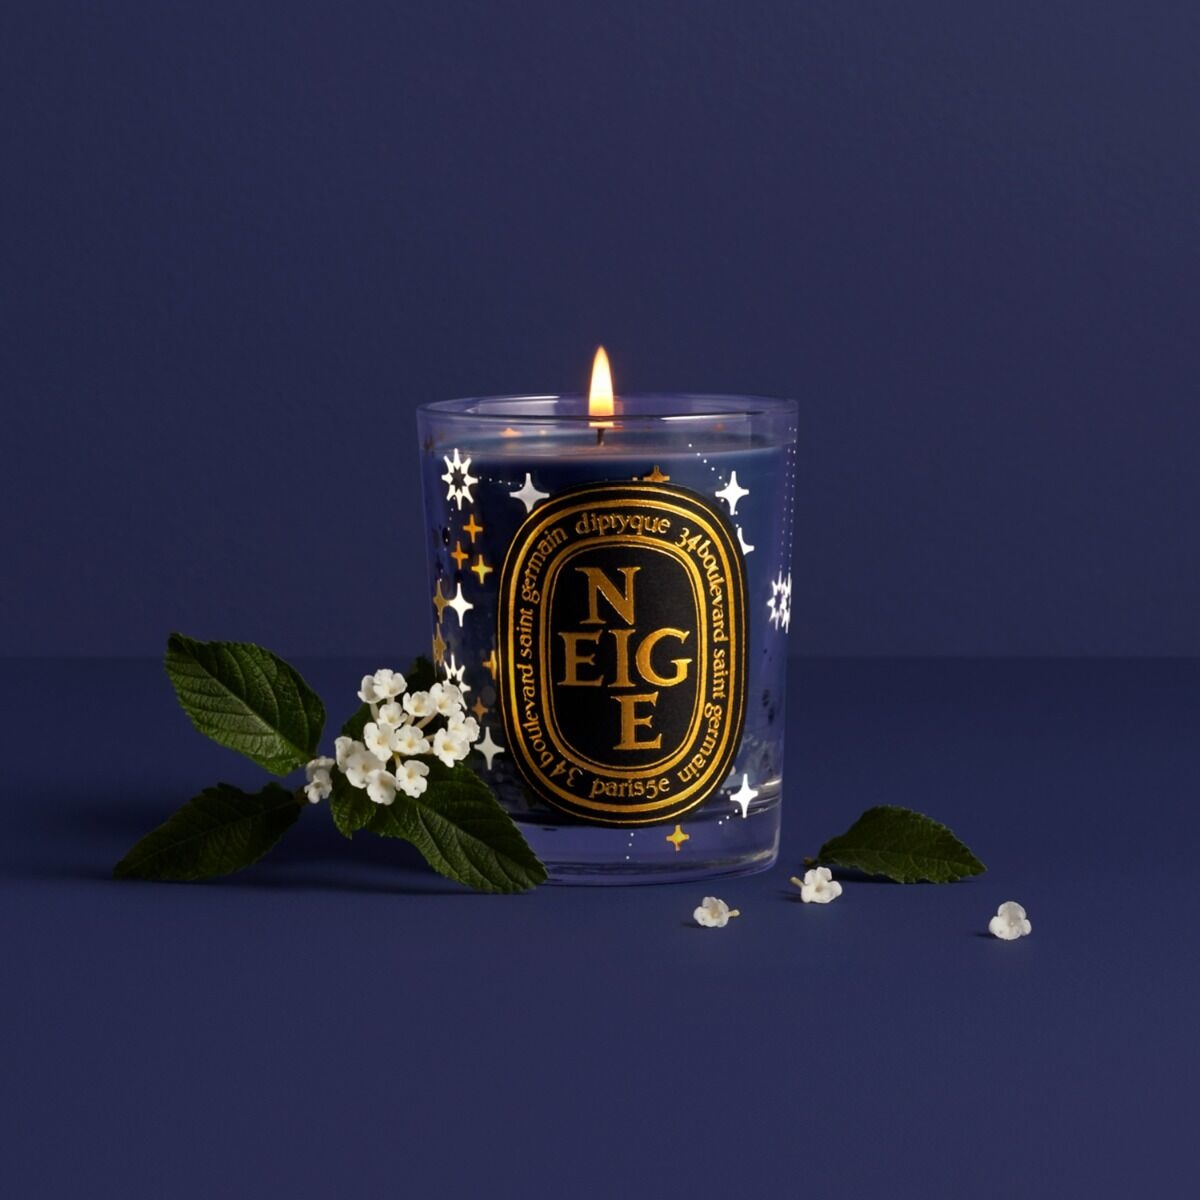 Diptyque - Neige / Snow Candle 190g - Limited Edition - Segraeti 